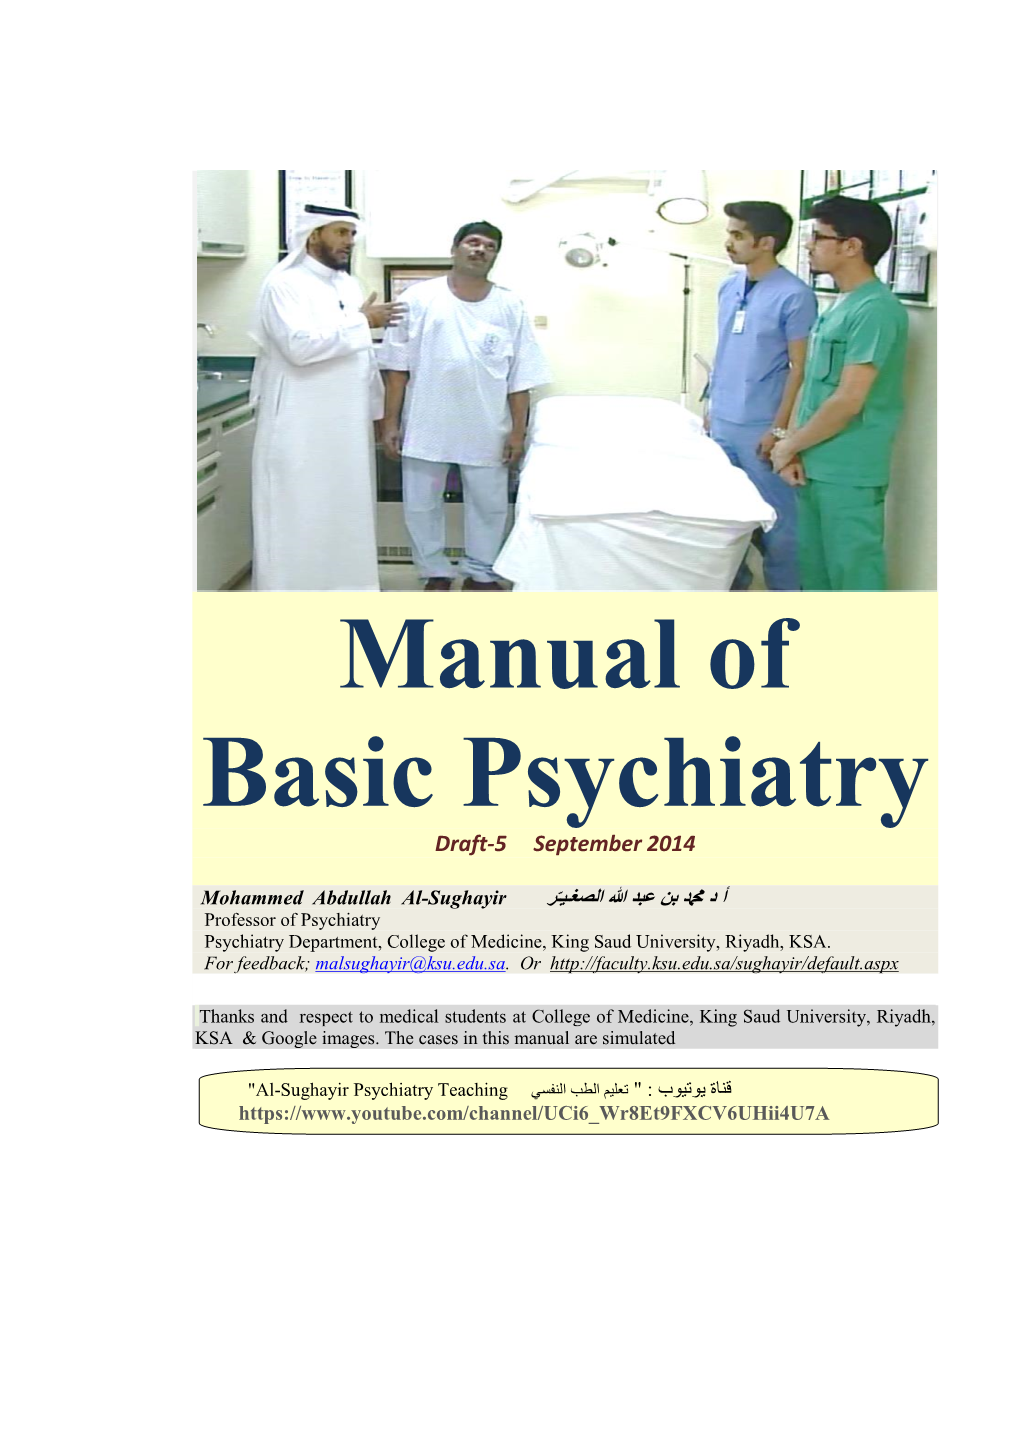 Manual of Basic Psychiatry / Draft- 5 2014 Introduction